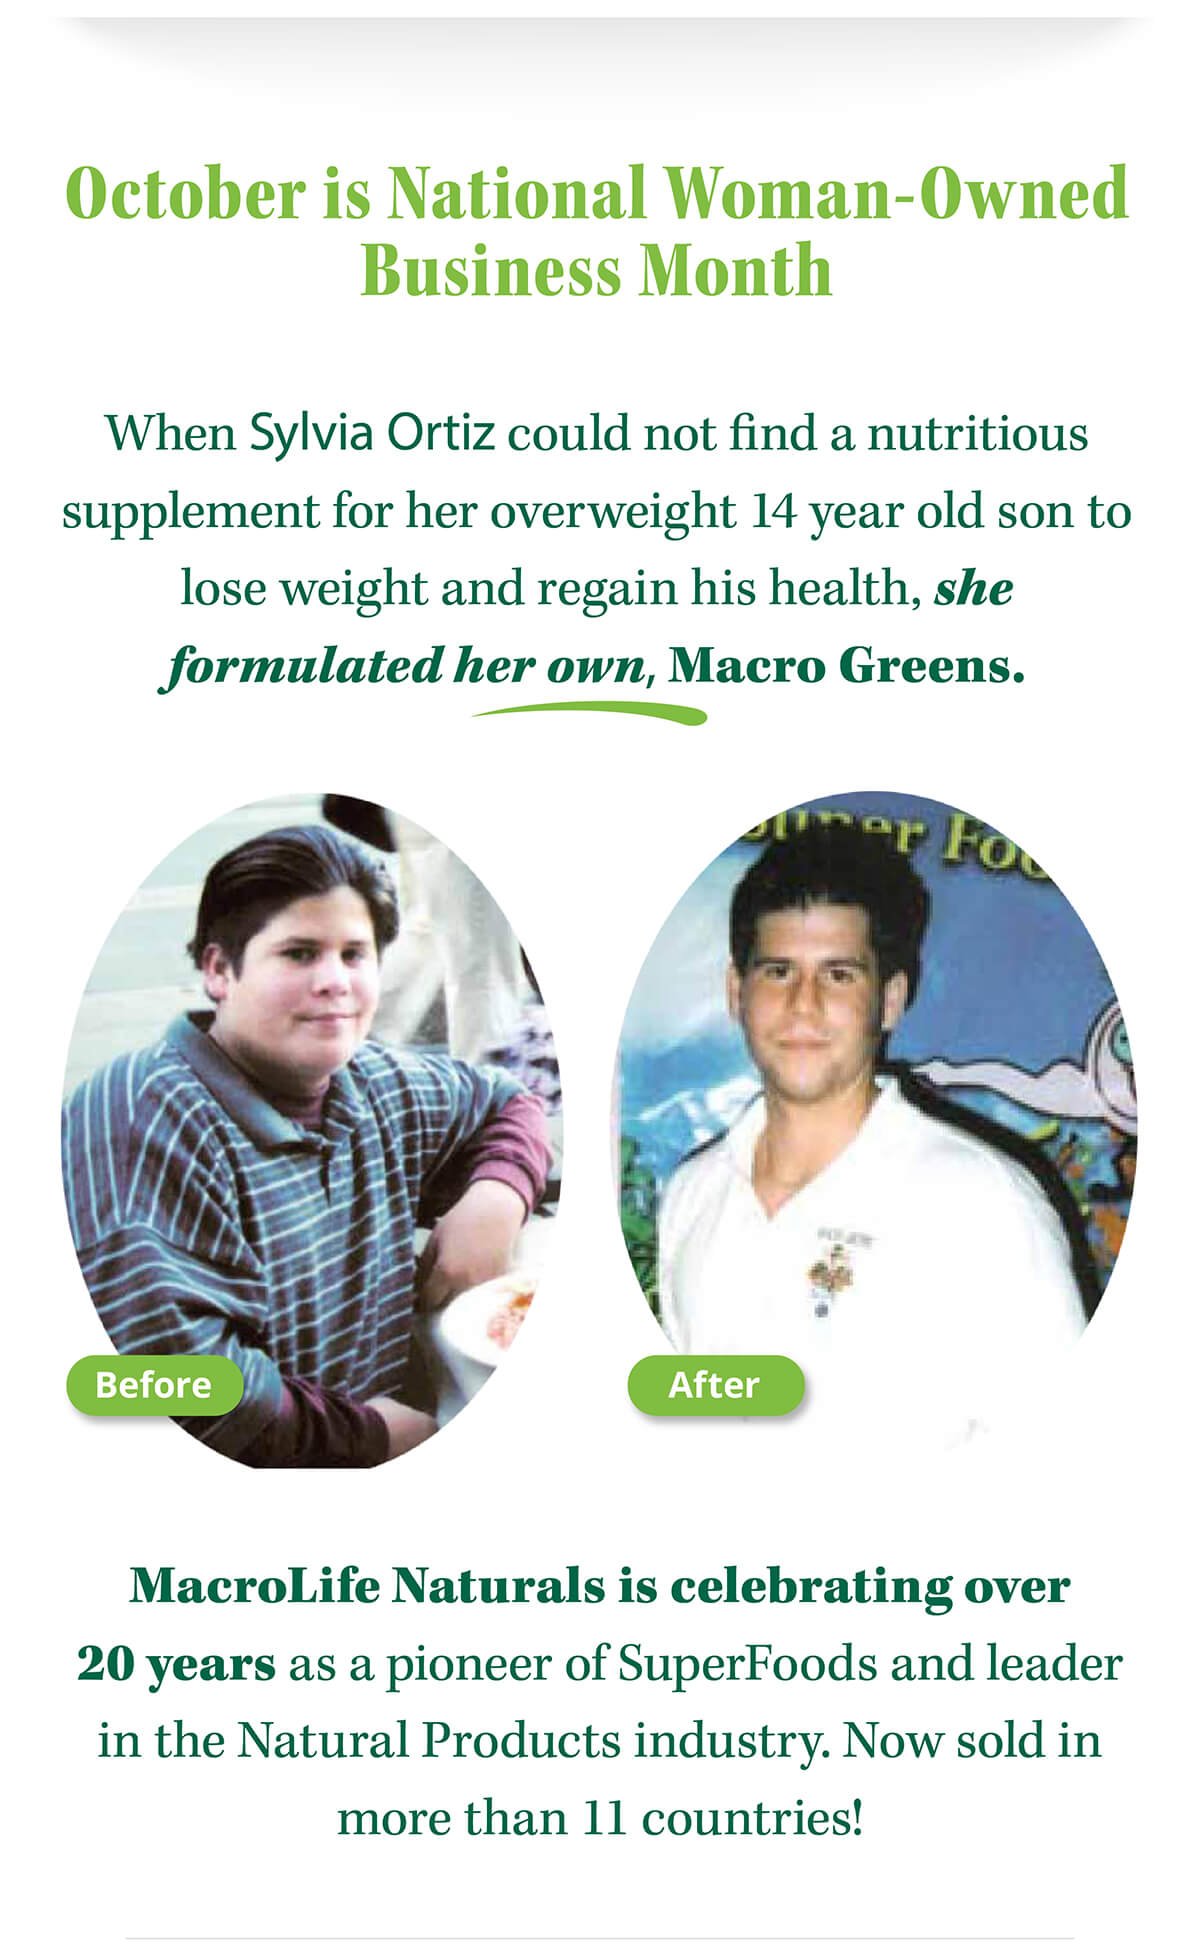 October is National Woman-Owned Business Month | When Sylvia Ortiz could not find a nutritious supplement for her overweight 14 year old son to lose weight and regain his health, she formulated her own, Macro Greens. | MacroLife Naturals is celebrating over  20 years as a pioneer of SuperFoods and leader in the Natural Products industry. Now sold in more than 11 countries!